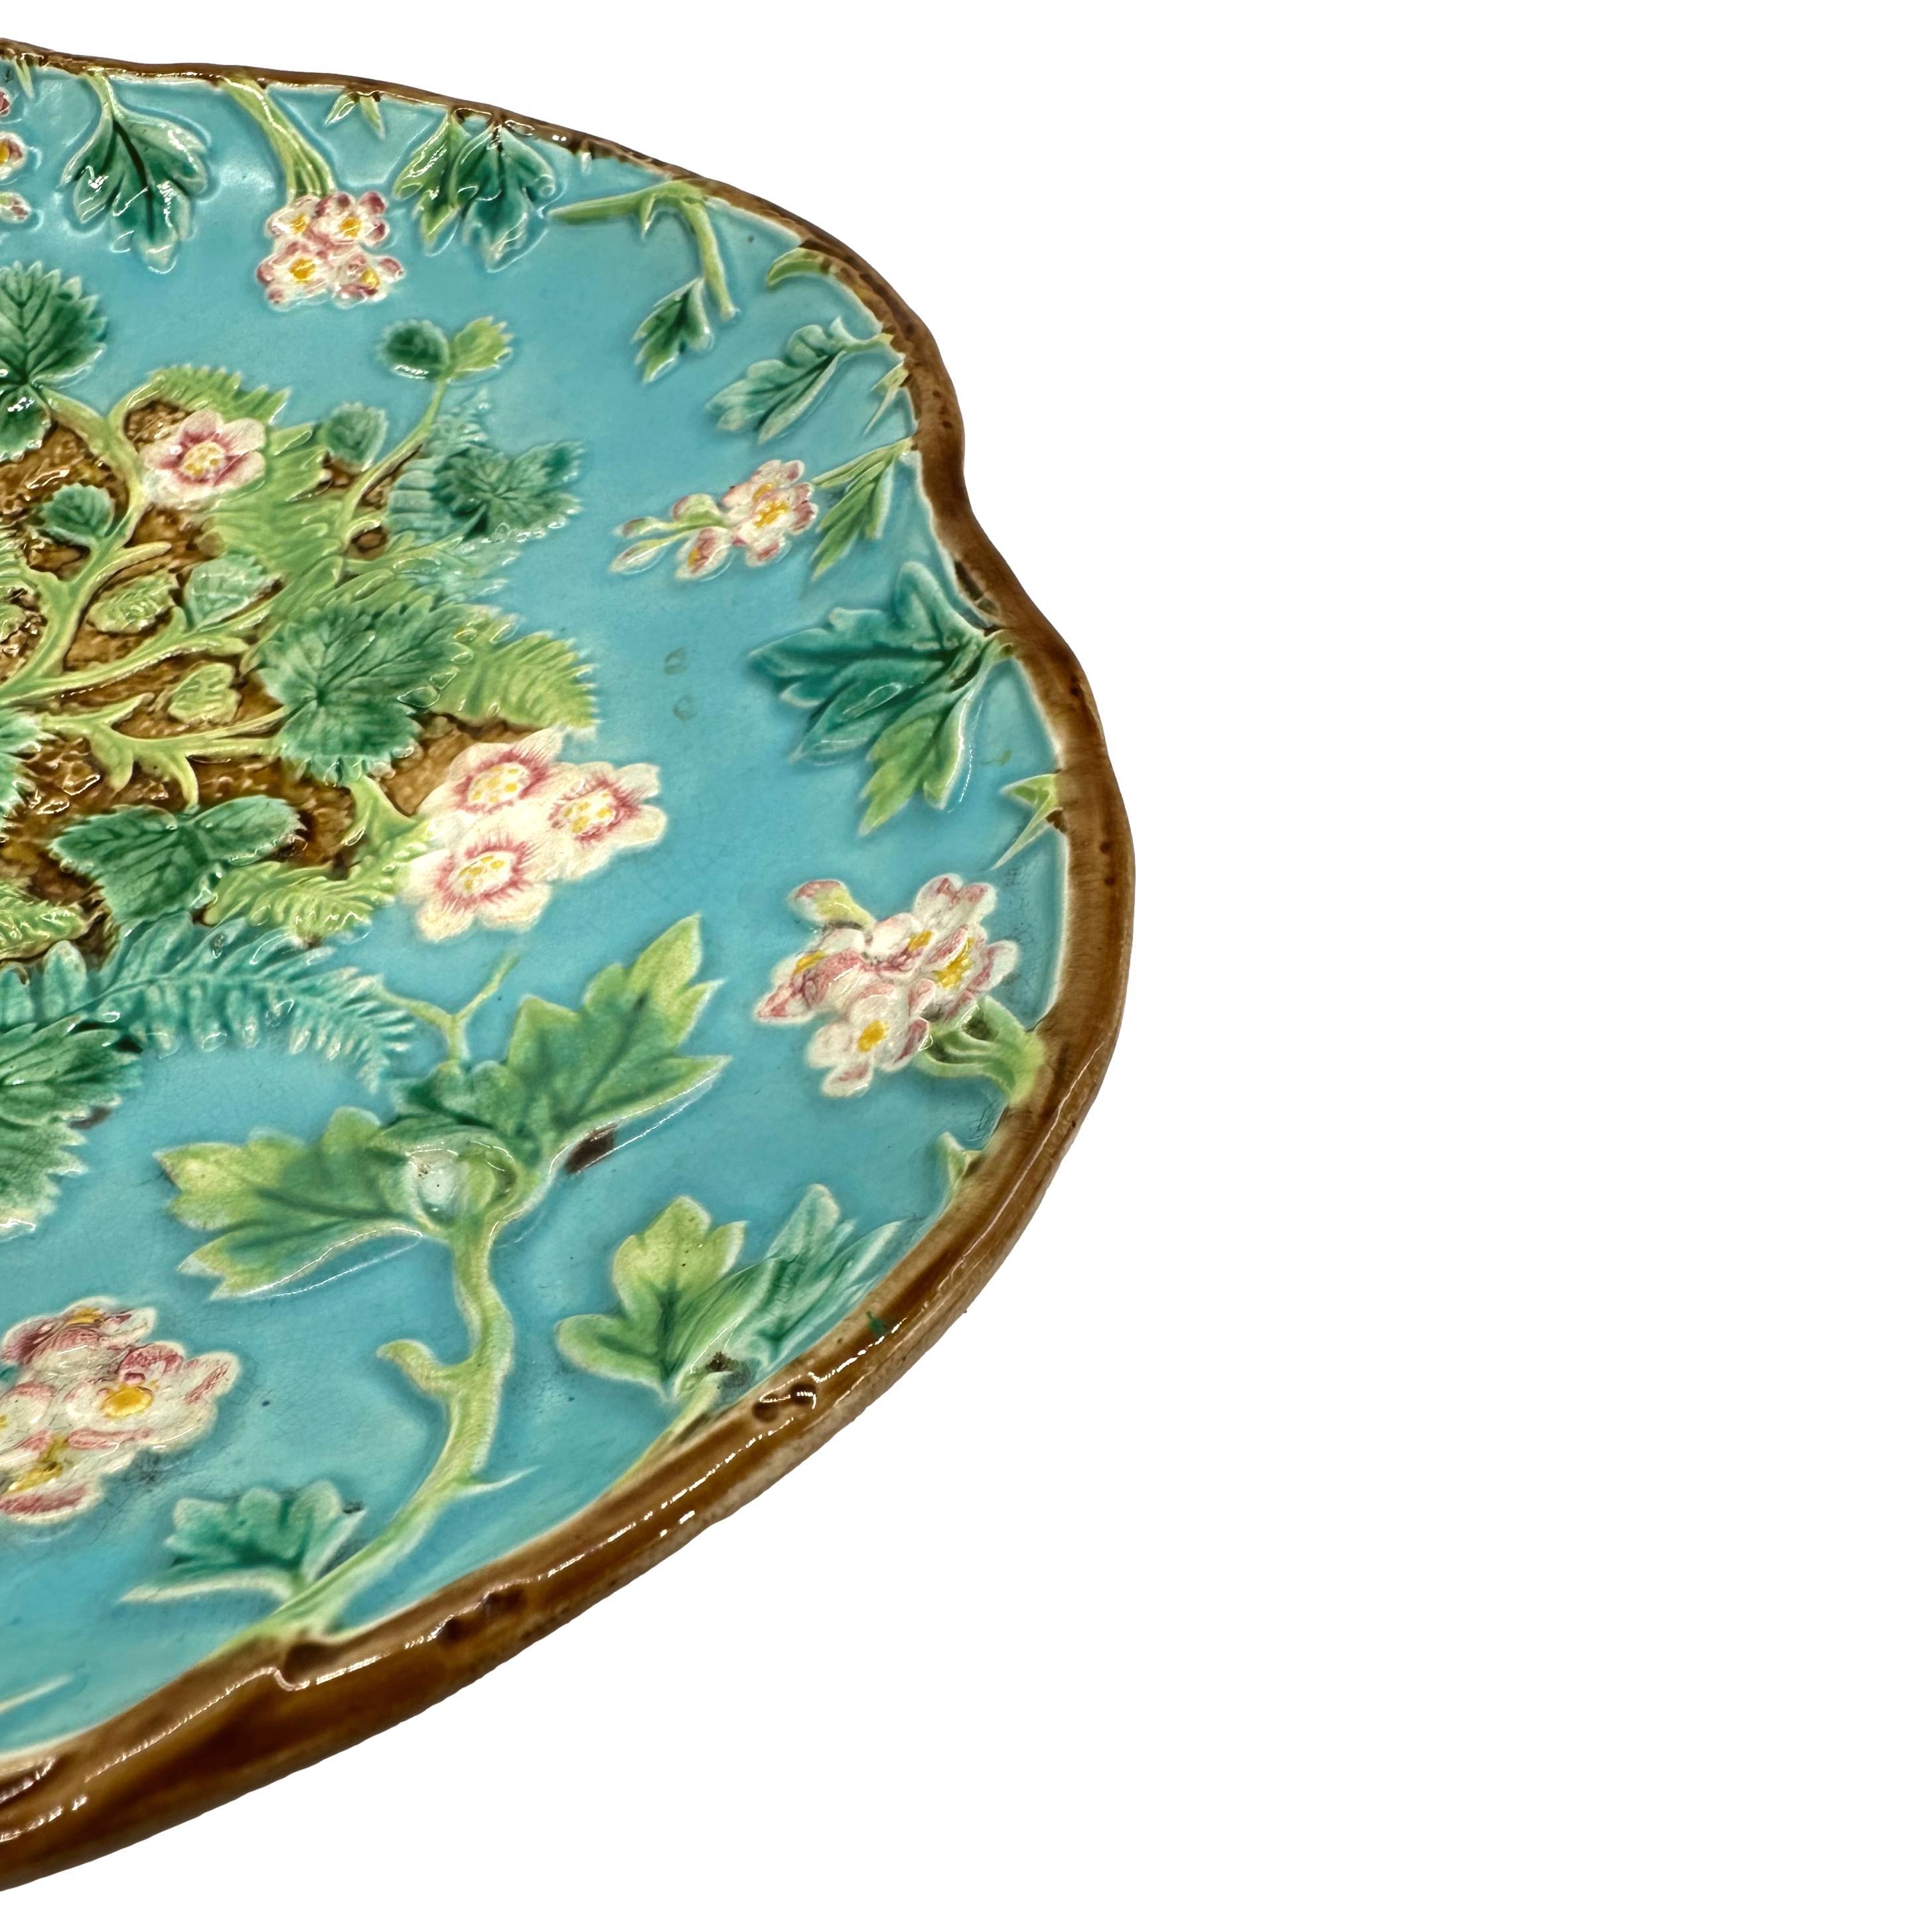 19th Century George Jones Majolica Strawberry Server Mounted by a Bird, English, circa 1870 For Sale